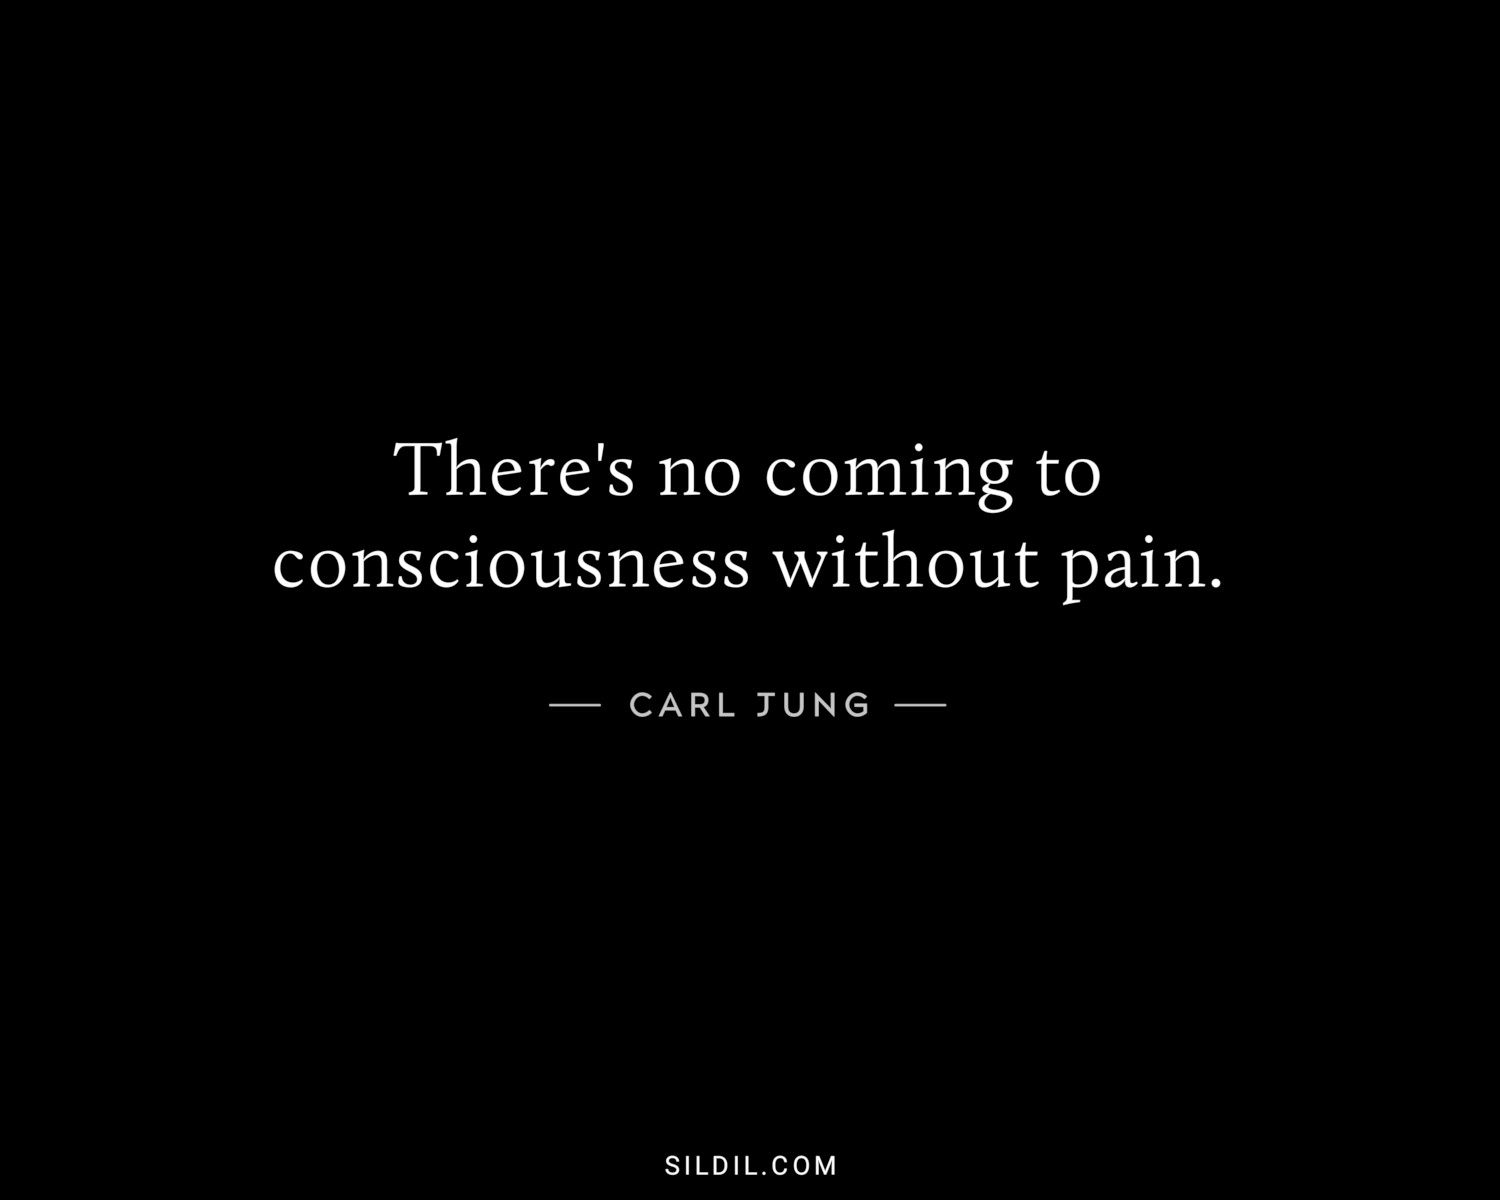 There's no coming to consciousness without pain.